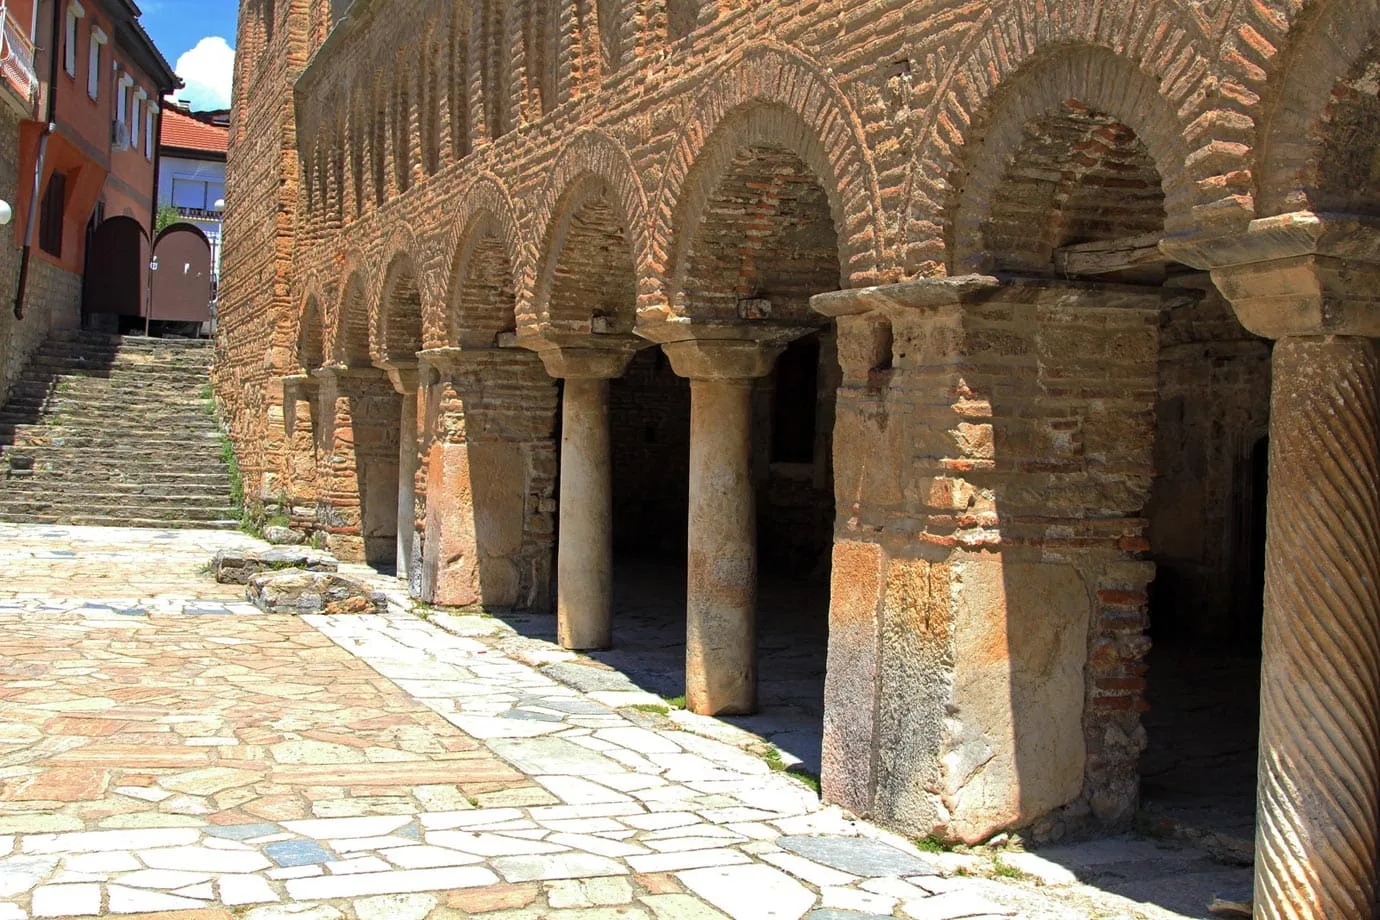 Ohrid is another ancient Roman city that dates back over 2,000 years